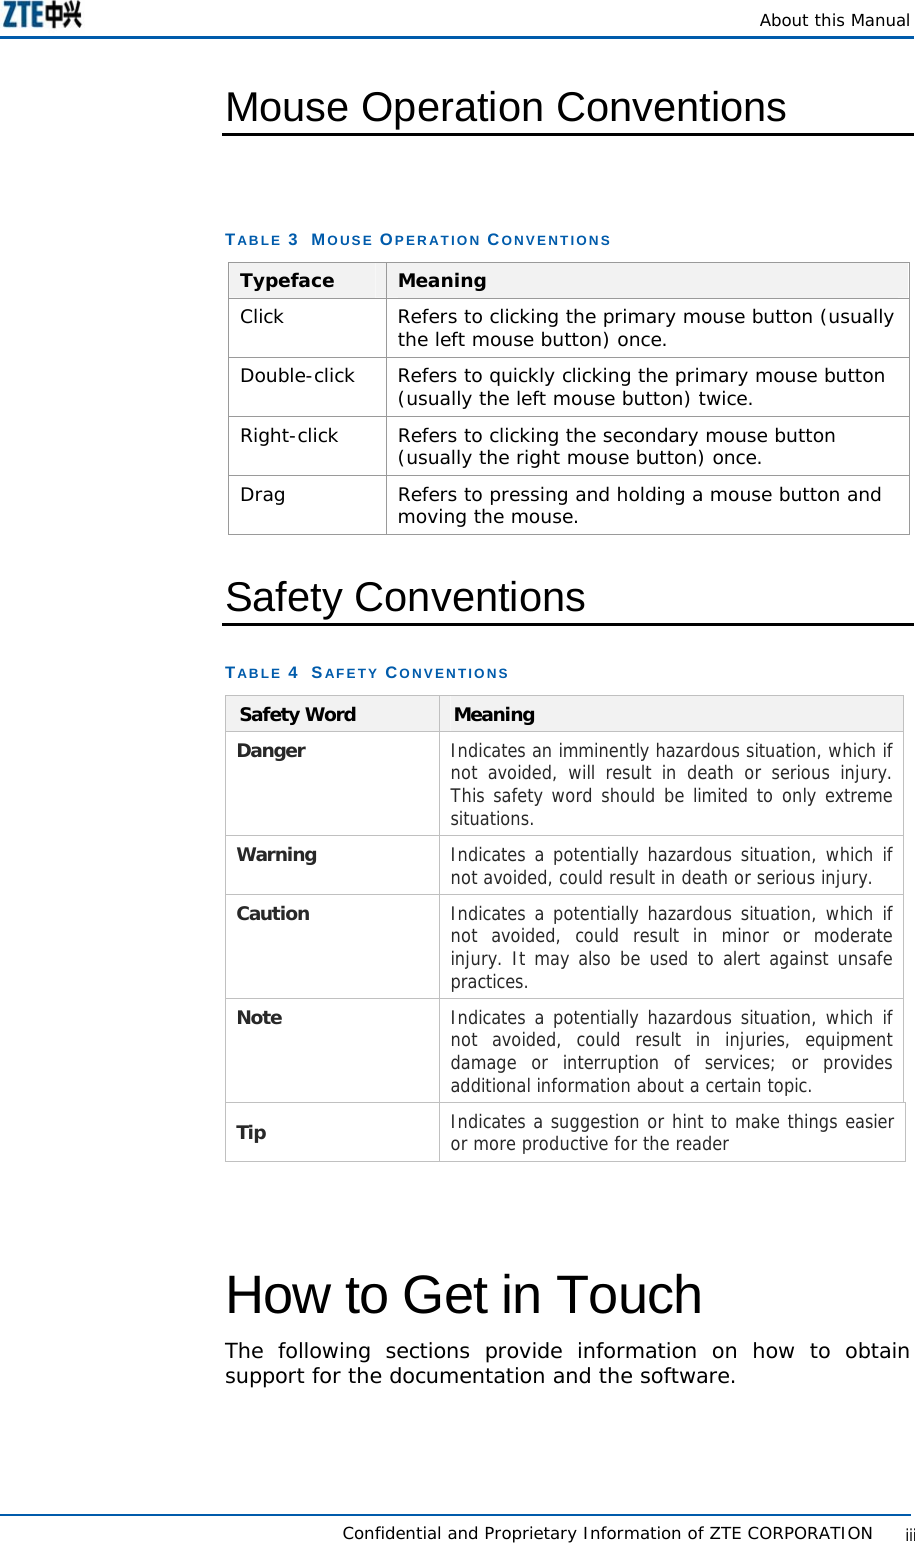    About this Manual   Confidential and Proprietary Information of ZTE CORPORATION           iiiMouse Operation Conventions  TABLE 3  MOUSE OPERATION CONVENTIONS Typeface  Meaning Click  Refers to clicking the primary mouse button (usually the left mouse button) once. Double-click  Refers to quickly clicking the primary mouse button (usually the left mouse button) twice. Right-click  Refers to clicking the secondary mouse button (usually the right mouse button) once. Drag  Refers to pressing and holding a mouse button and moving the mouse. Safety Conventions TABLE 4  SAFETY CONVENTIONS Safety Word  Meaning Danger  Indicates an imminently hazardous situation, which if not avoided, will result in death or serious injury. This safety word should be limited to only extreme situations. Warning  Indicates a potentially hazardous situation, which if not avoided, could result in death or serious injury. Caution   Indicates a potentially hazardous situation, which if not avoided, could result in minor or moderate injury. It may also be used to alert against unsafe practices. Note  Indicates a potentially hazardous situation, which if not avoided, could result in injuries, equipment damage or interruption of services; or provides additional information about a certain topic. Tip  Indicates a suggestion or hint to make things easier or more productive for the reader   How to Get in Touch The following sections provide information on how to obtain support for the documentation and the software. 